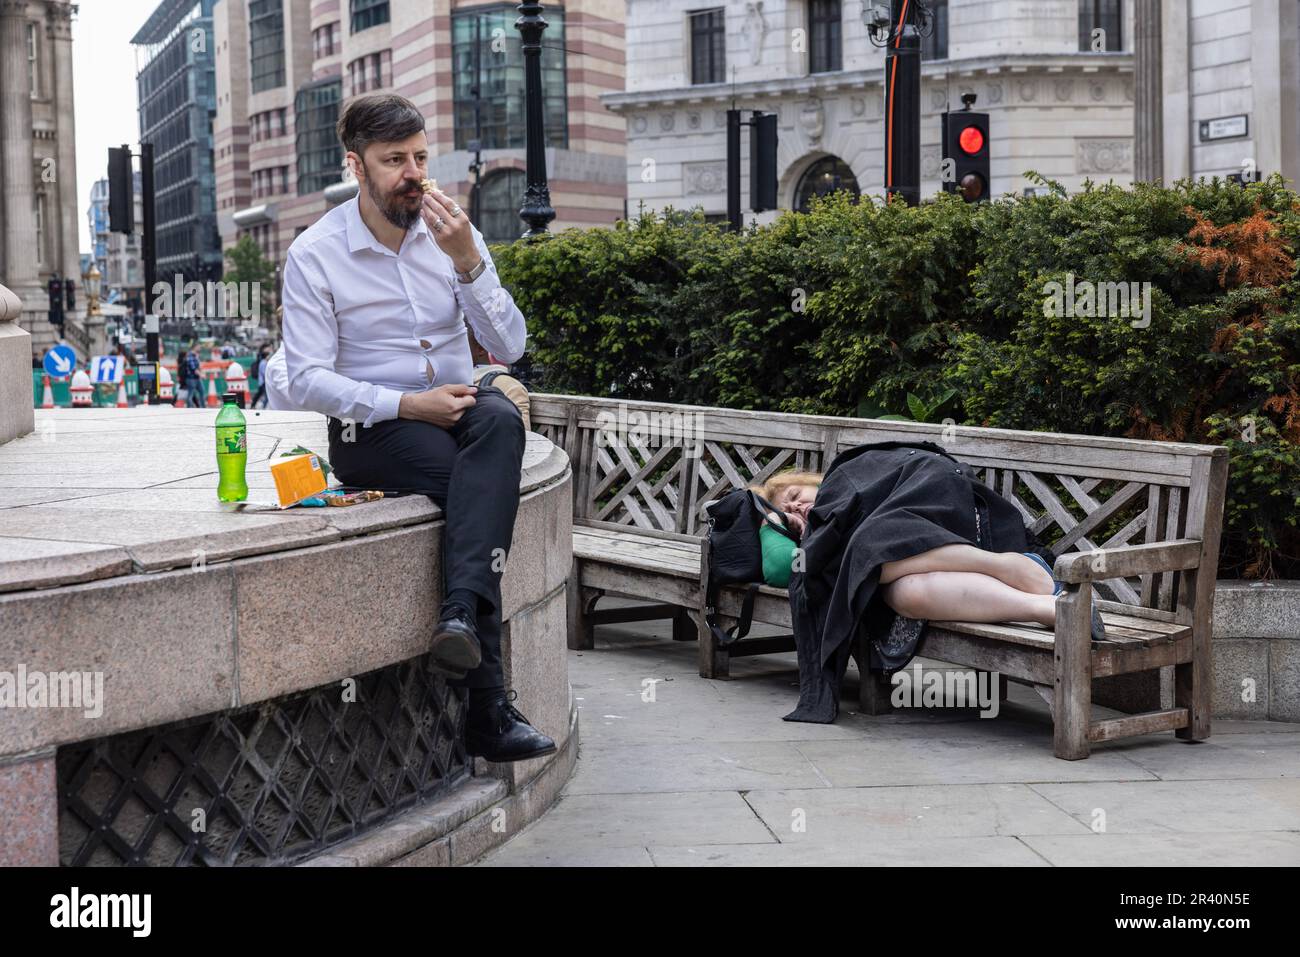 City worker eating his lunch whilst a woman sleeps on a bench closeby outside the Royal Exchange, City of London, England, United Kingdom Stock Photo